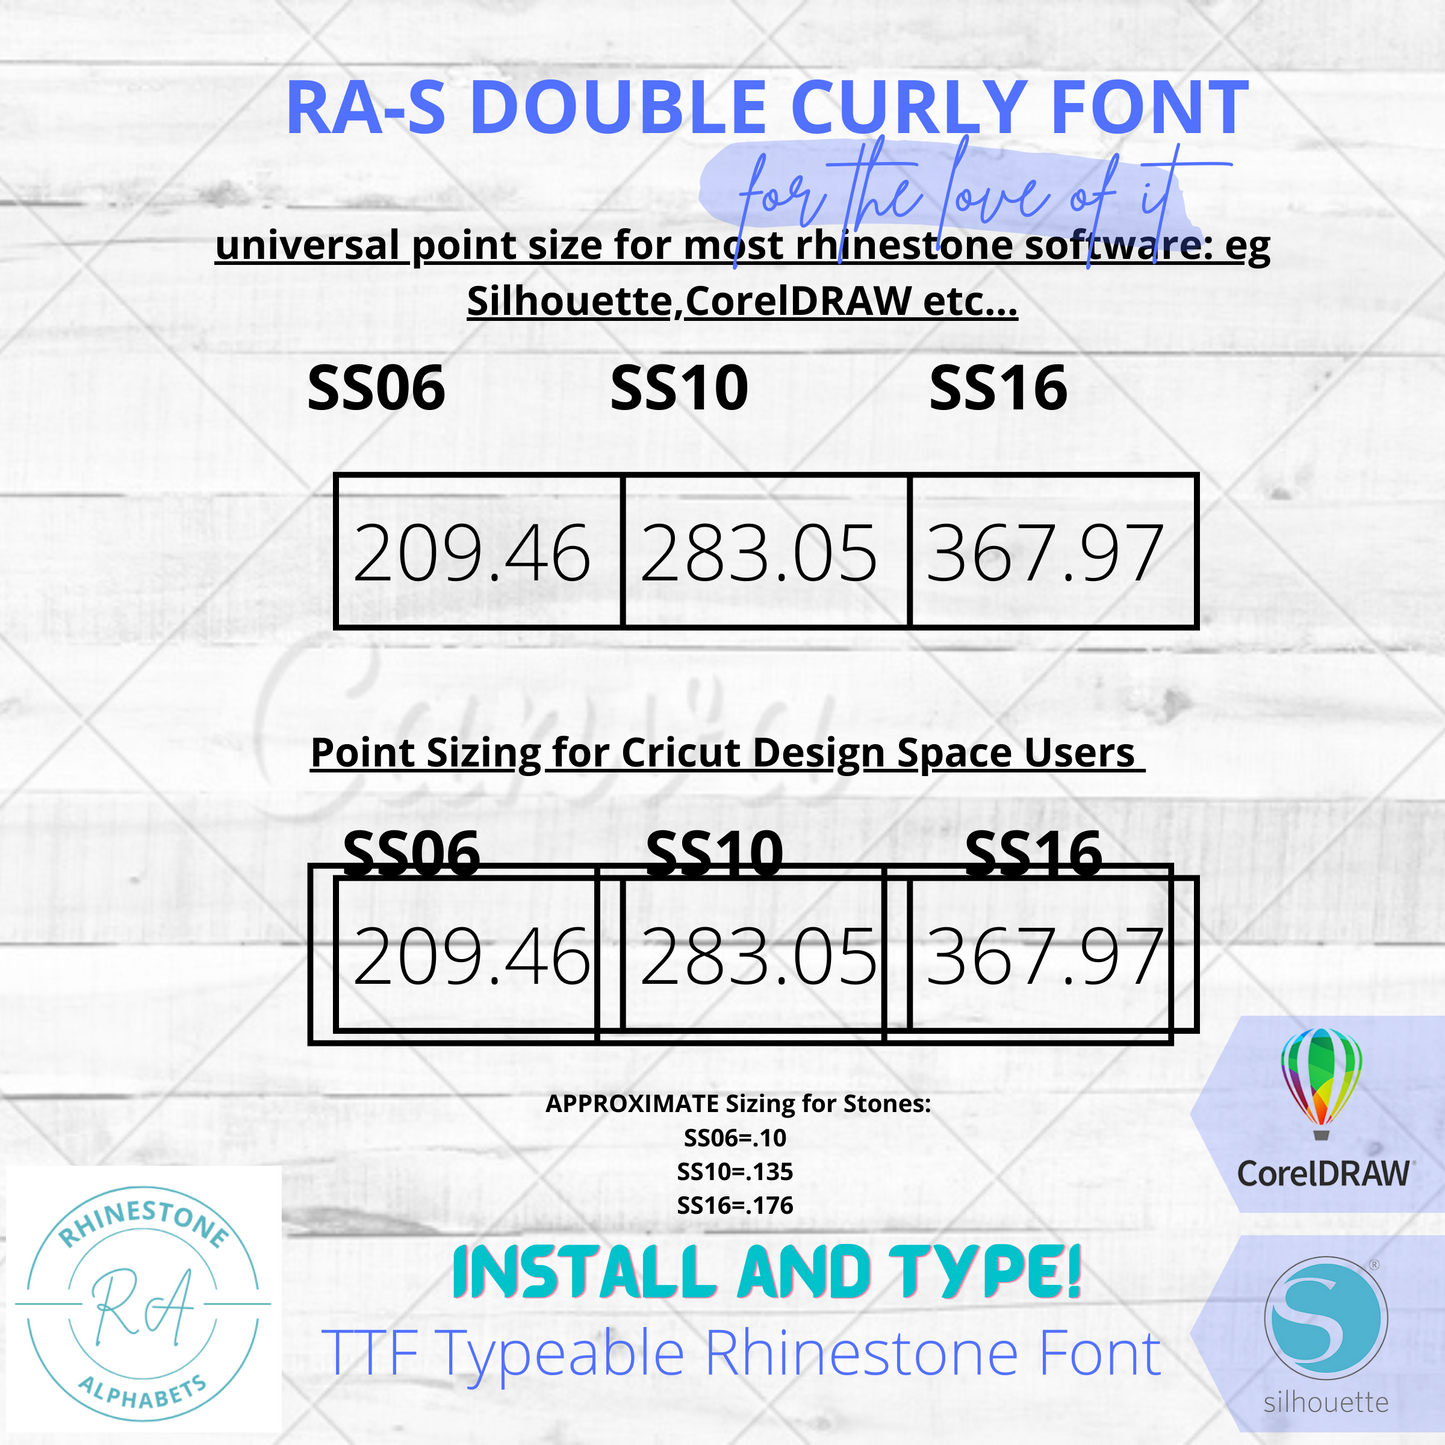 RA-S Double Curly Font